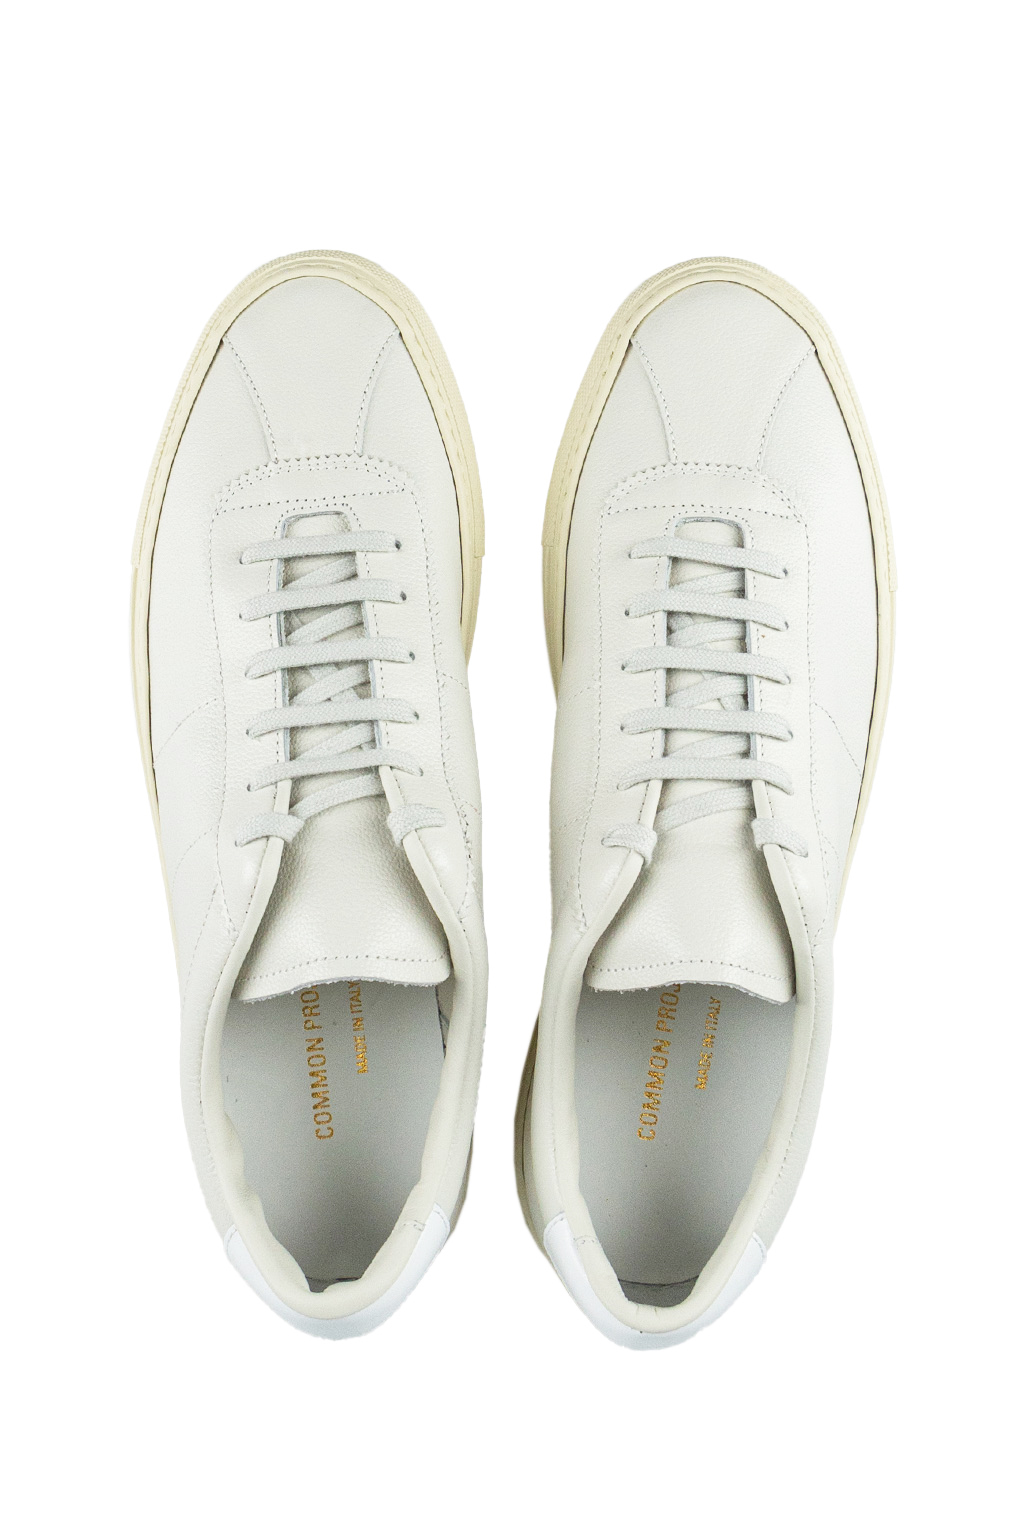 Common Projects Tennis 77 - White